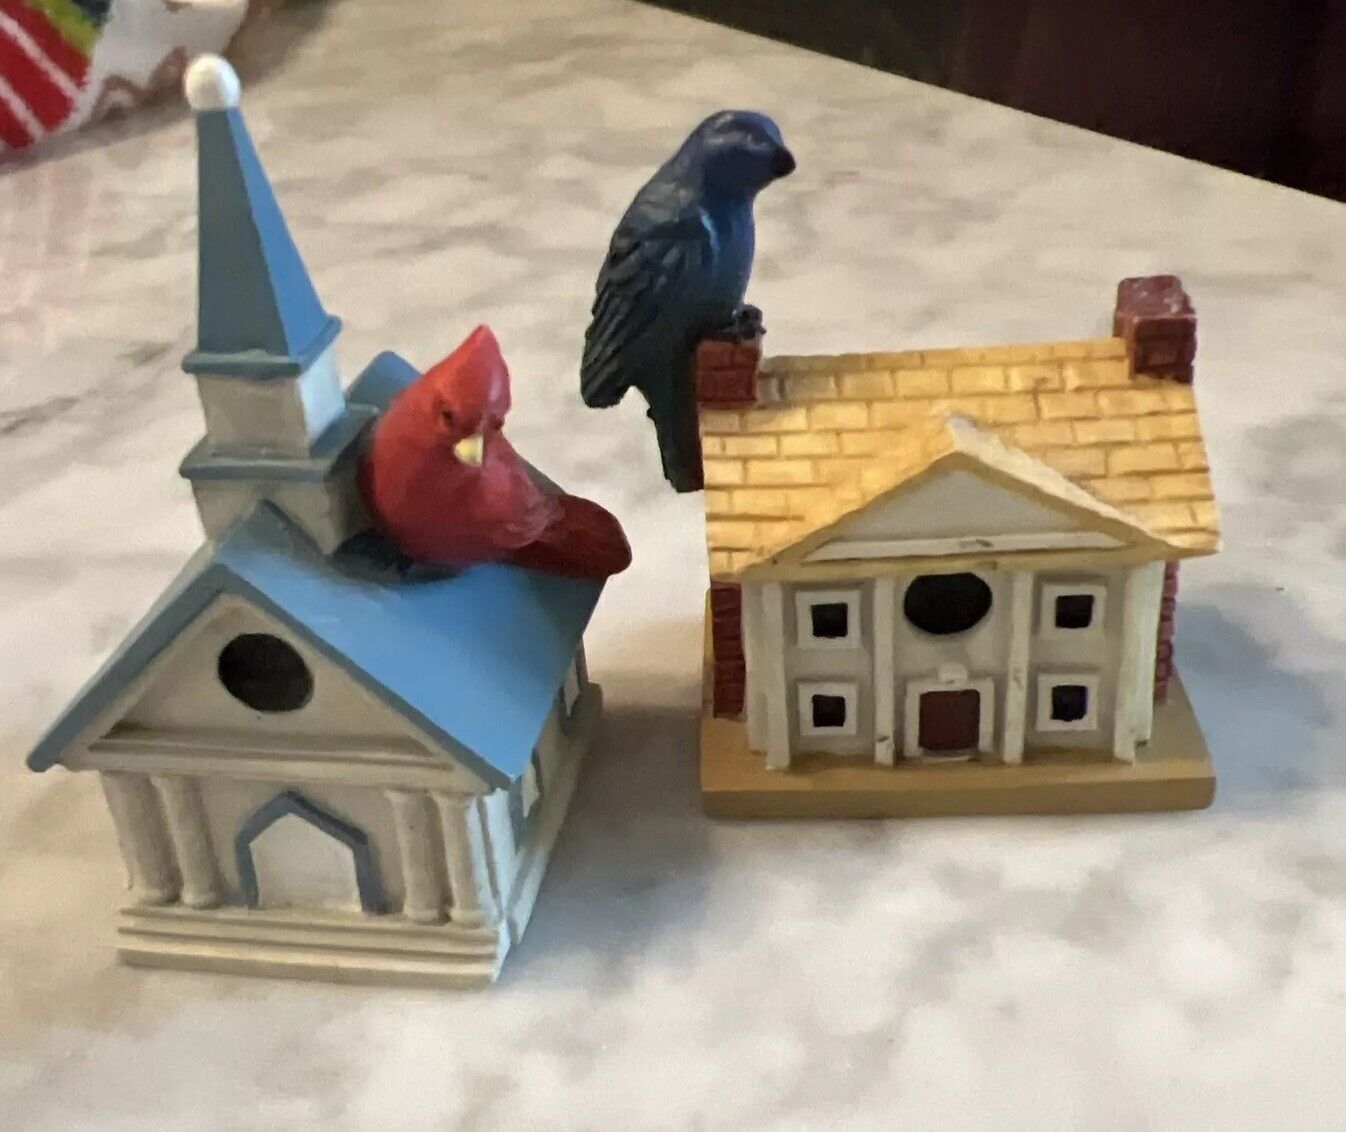 Lot of 2 Vintage Lenox Miniature Bird Houses Retired Collectible Houses